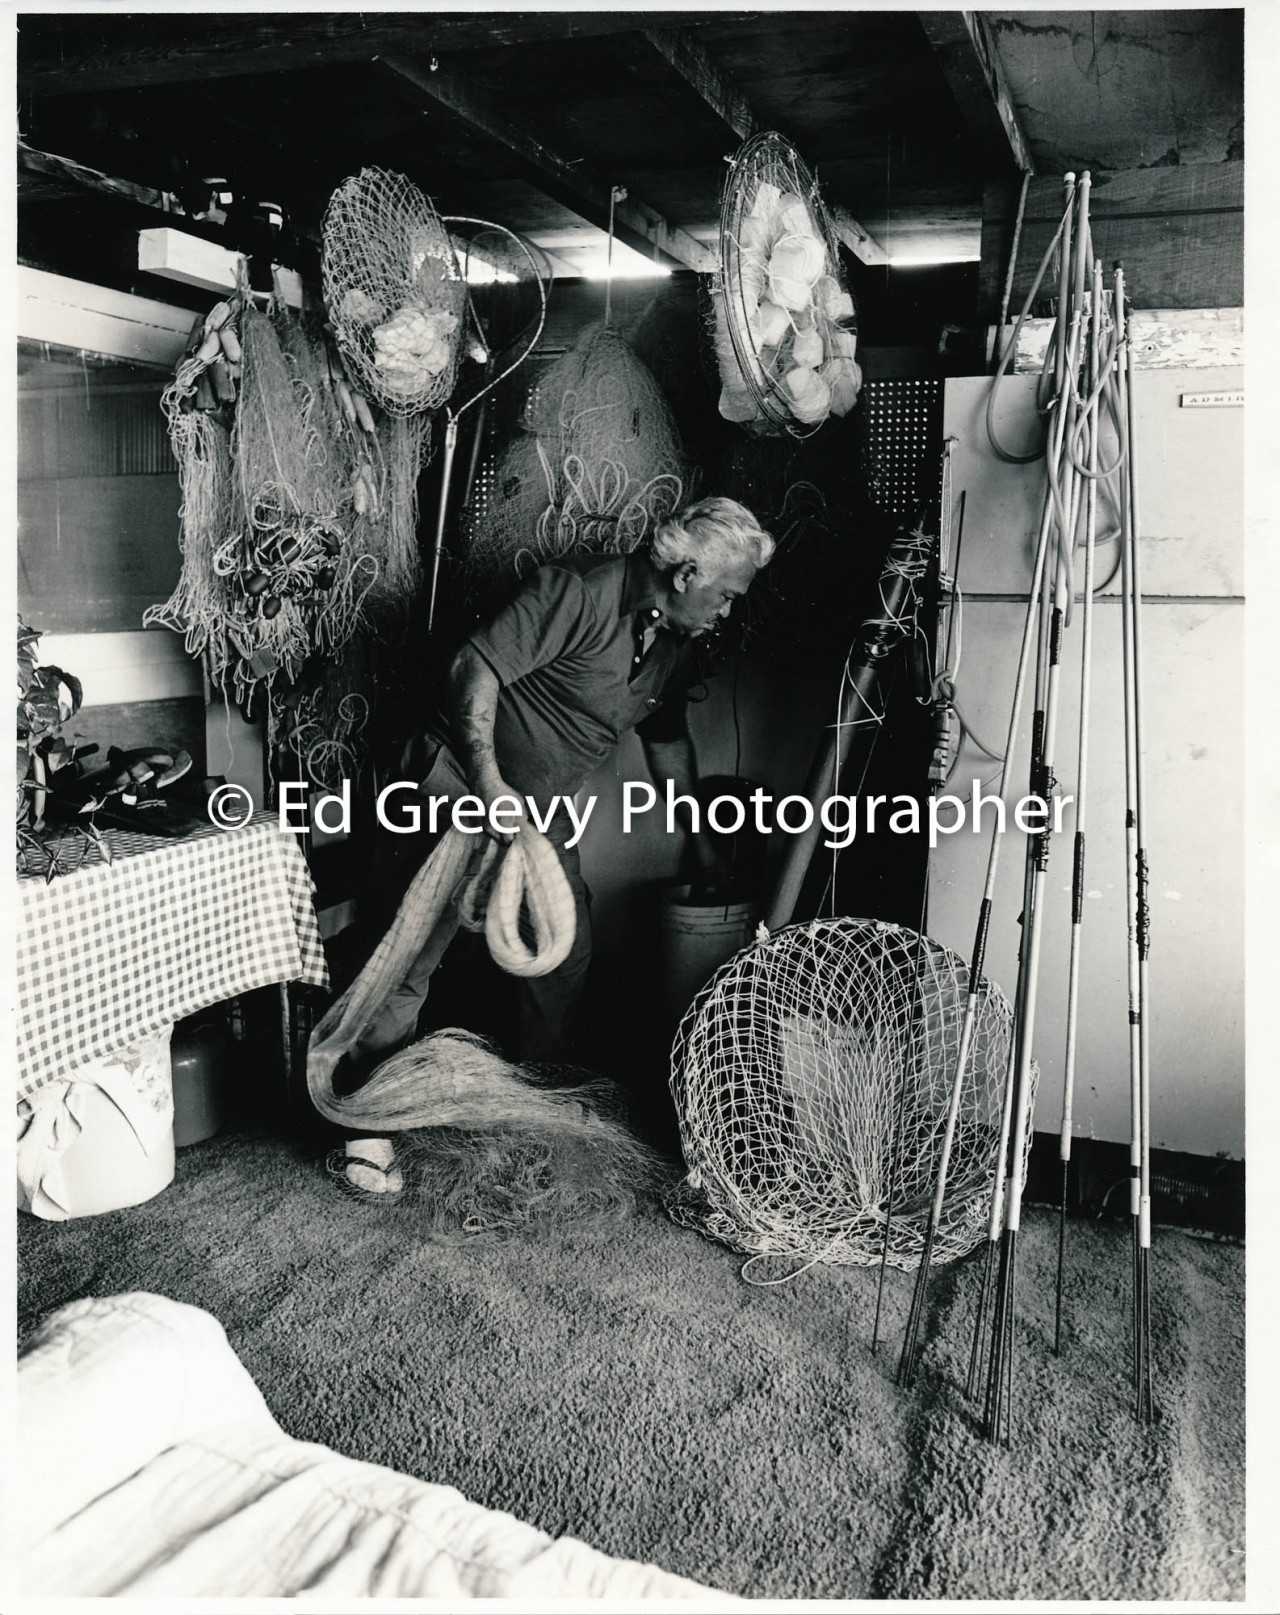 Clement Apollo in his Sand Island home with his nets (11 November 1979) Negative: 4091-5-12 | Ed Greevy Photographer